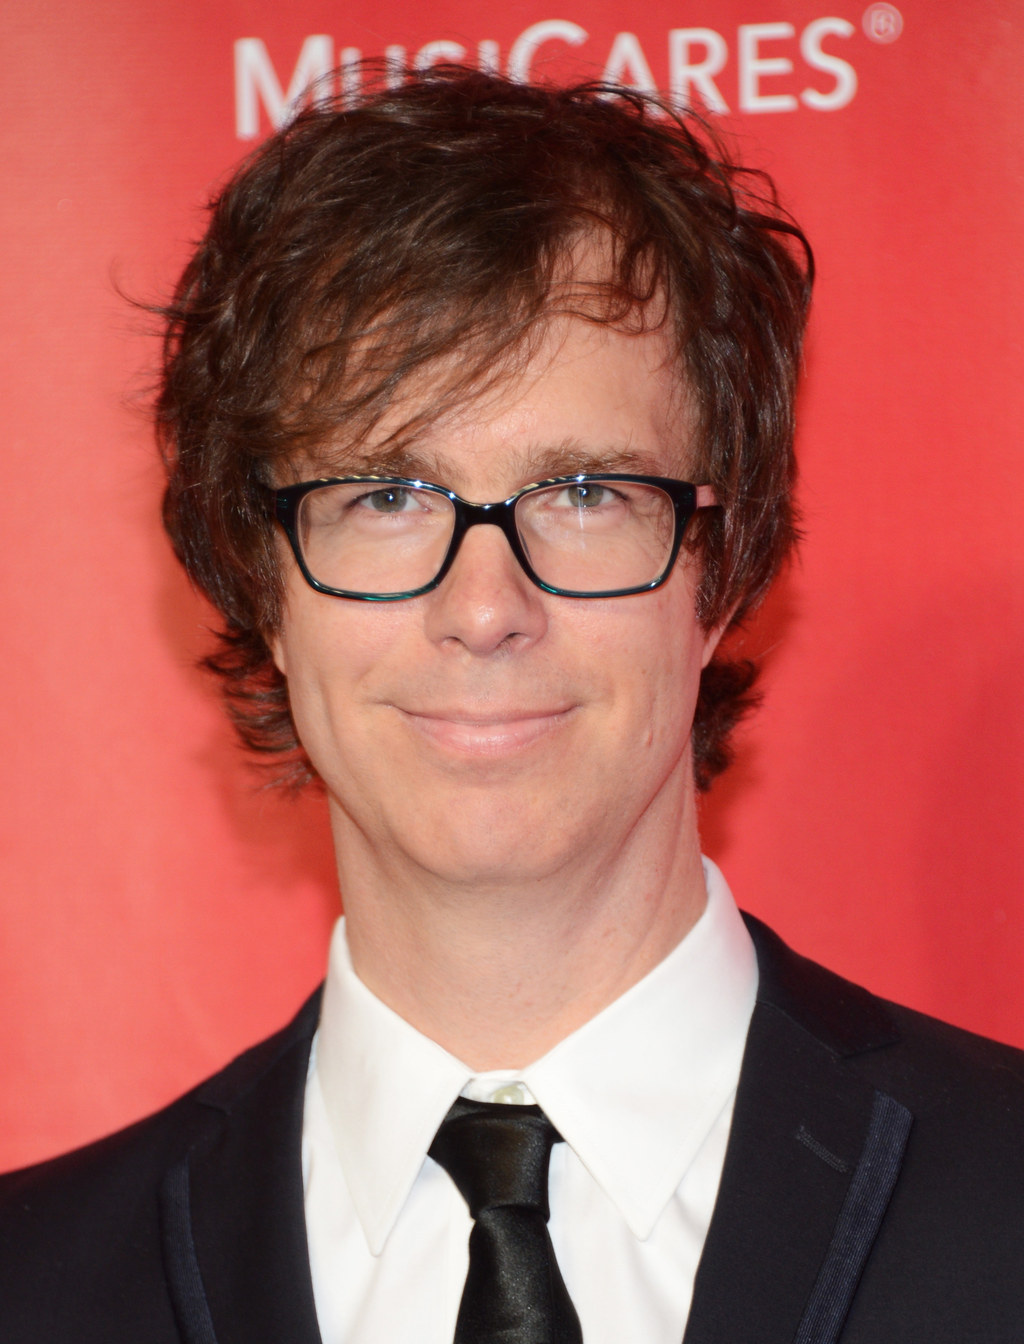 17 Pictures Of Ben Folds And His Glasses